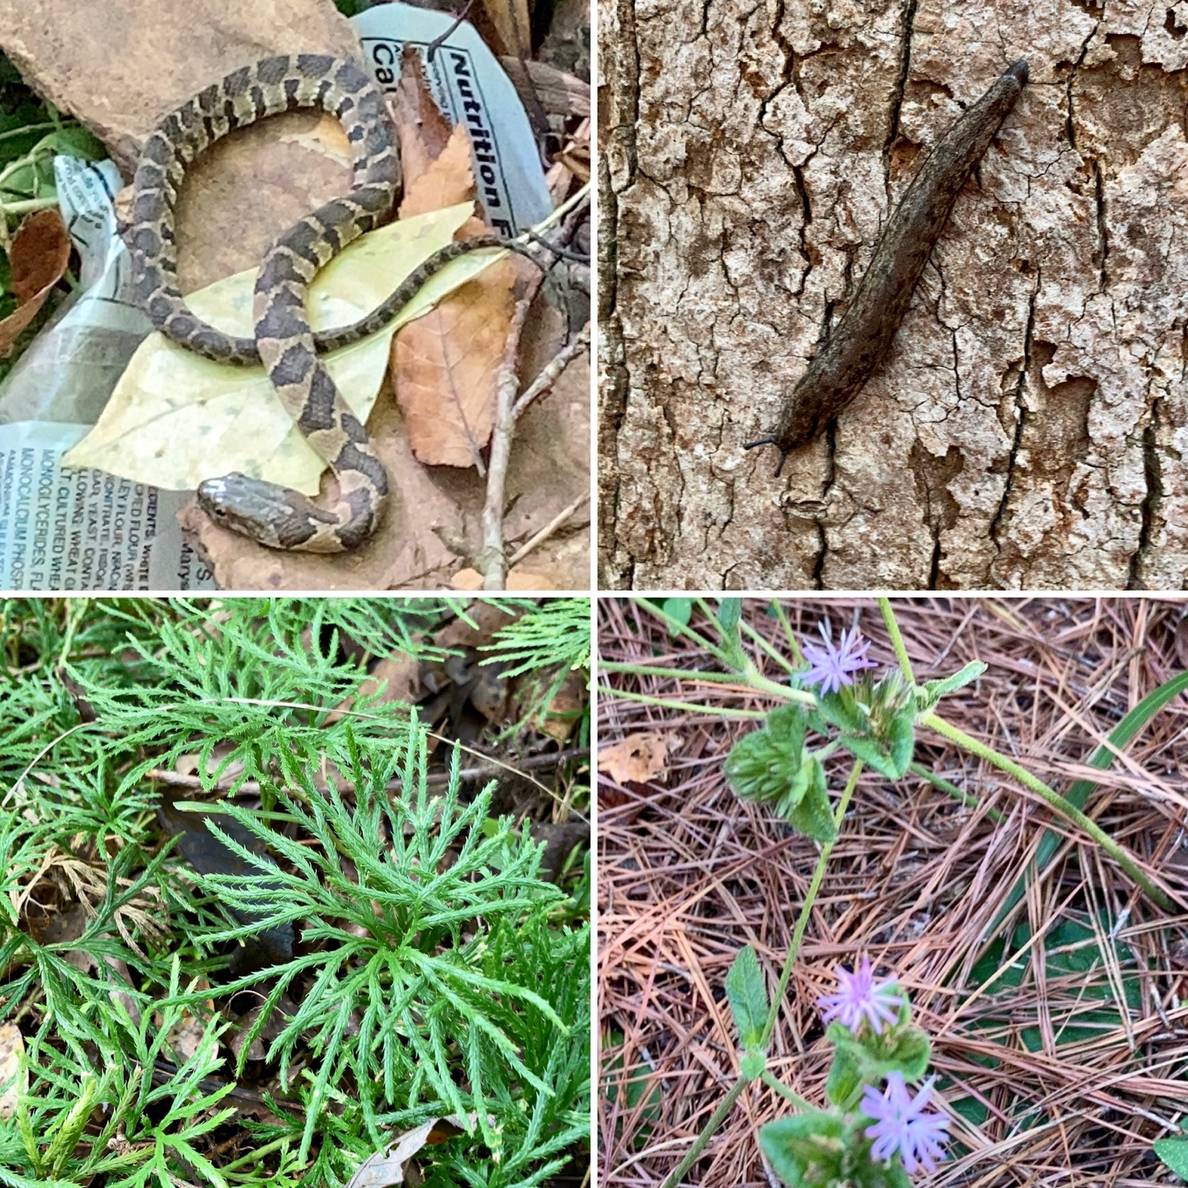 Four photos. Top left is a snake, too right is a slug, bottom left is a green plant, bottom right is a green plant with purple flowers.